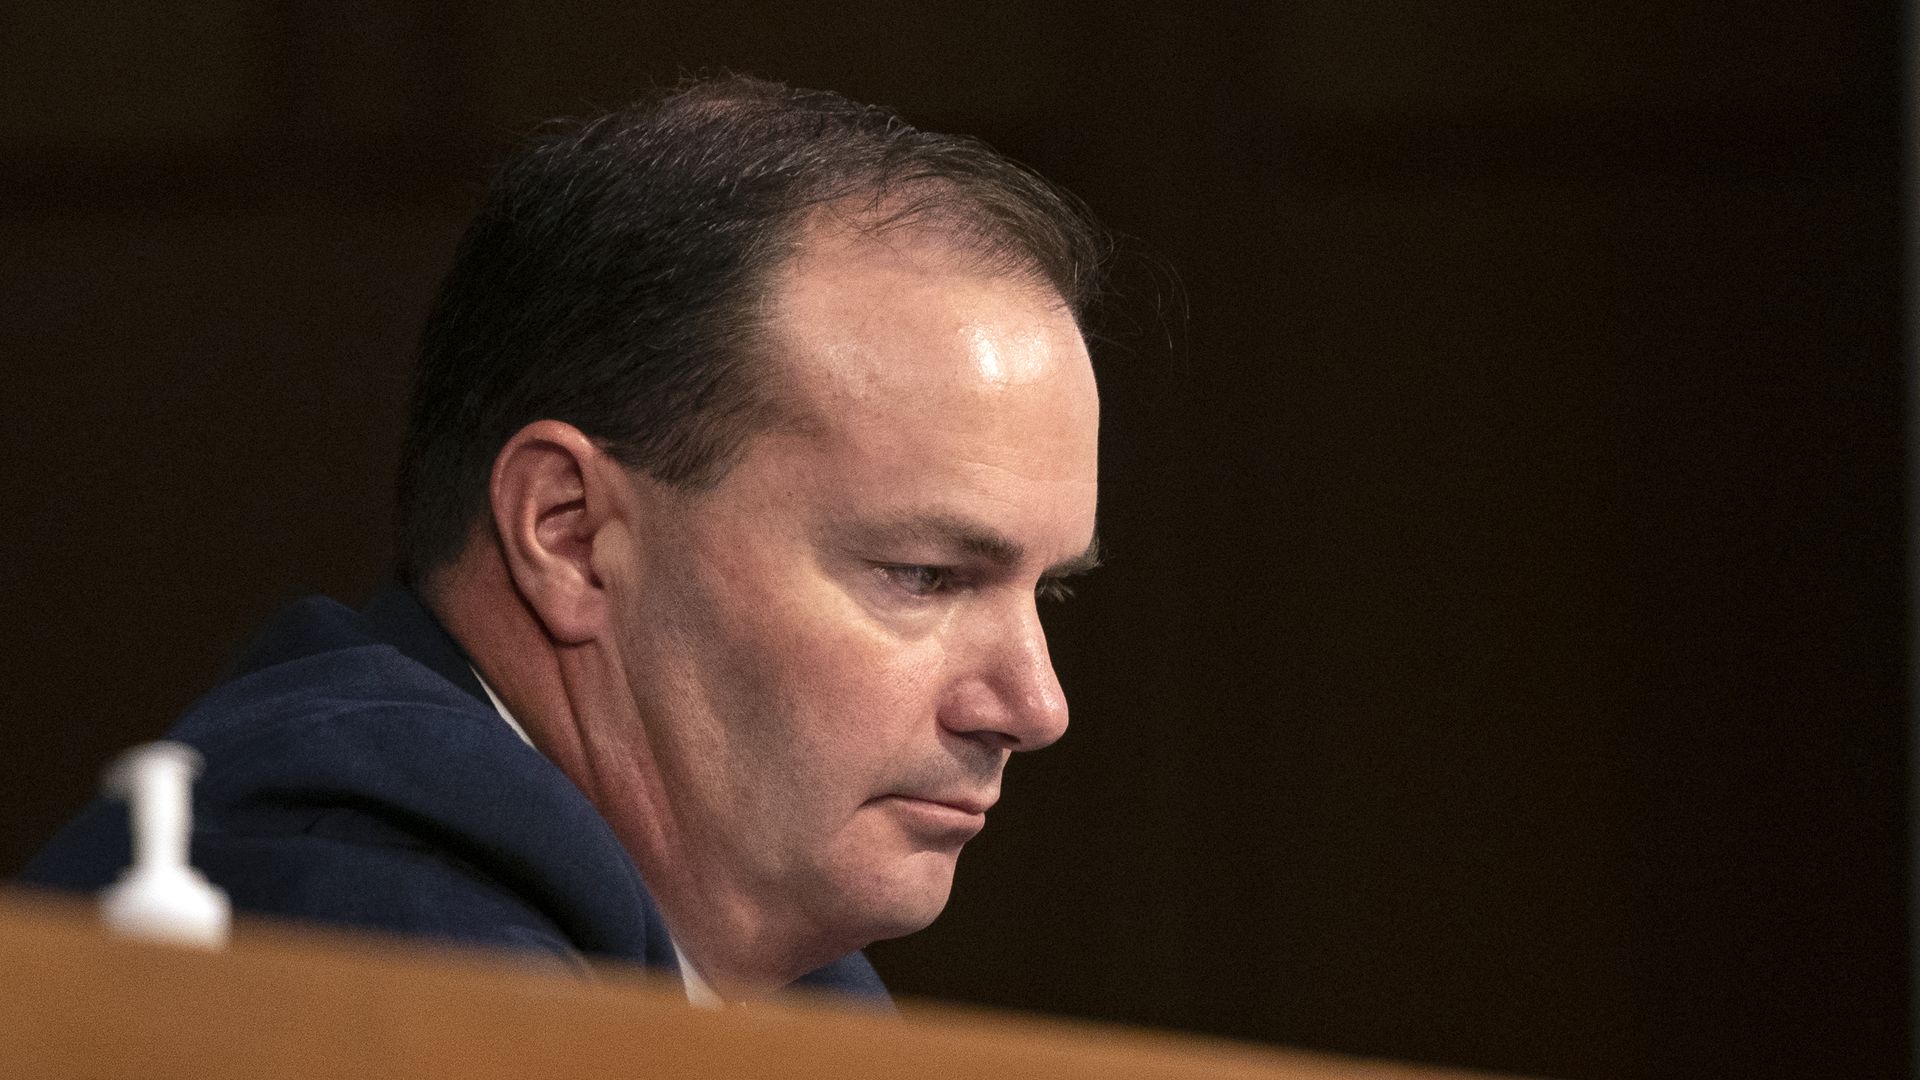  Senator Mike Lee (R-UT) attends the Supreme Court confirmation hearing for Judge Amy Coney Barrett